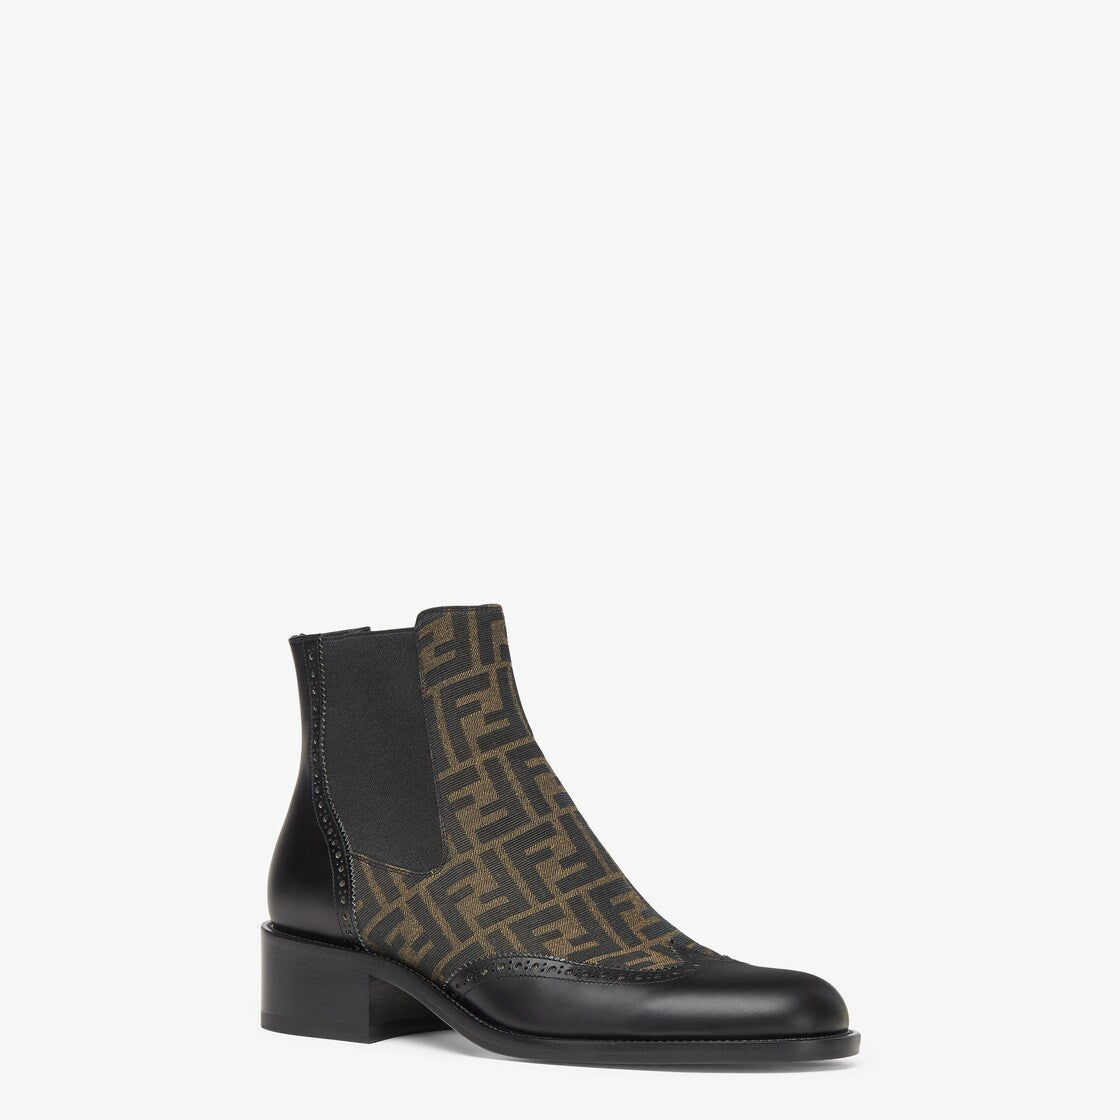 Fendi Ankle Boots Black Leather Ankle Boots